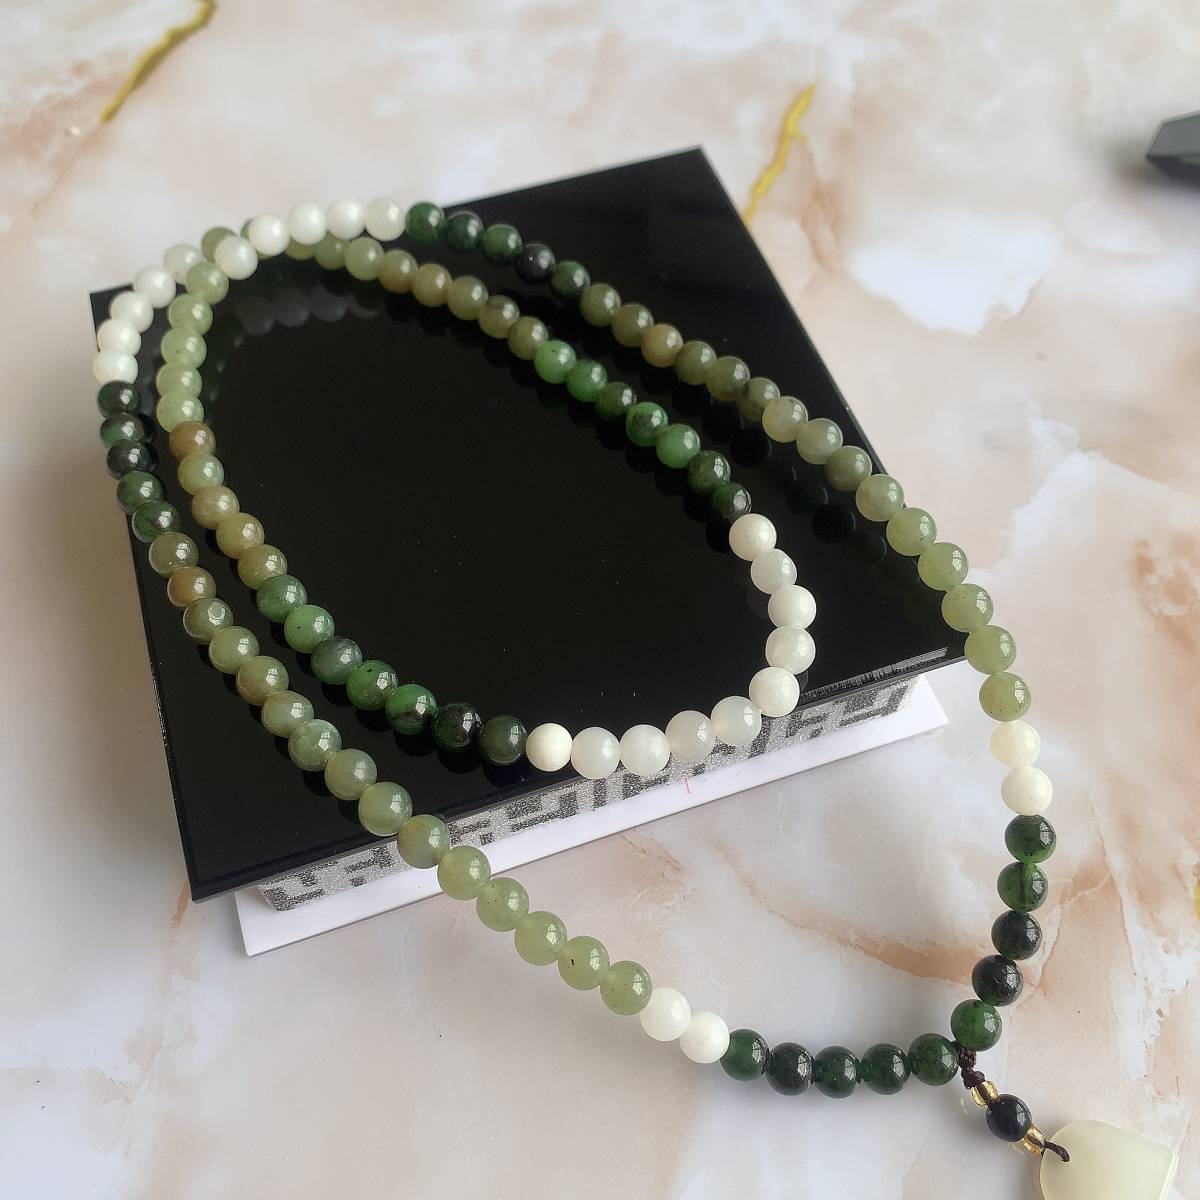 * peace rice field sphere * many .*..* jade * necklace * Power Stone * natural stone * wrapping sack attaching * in present .PR61308